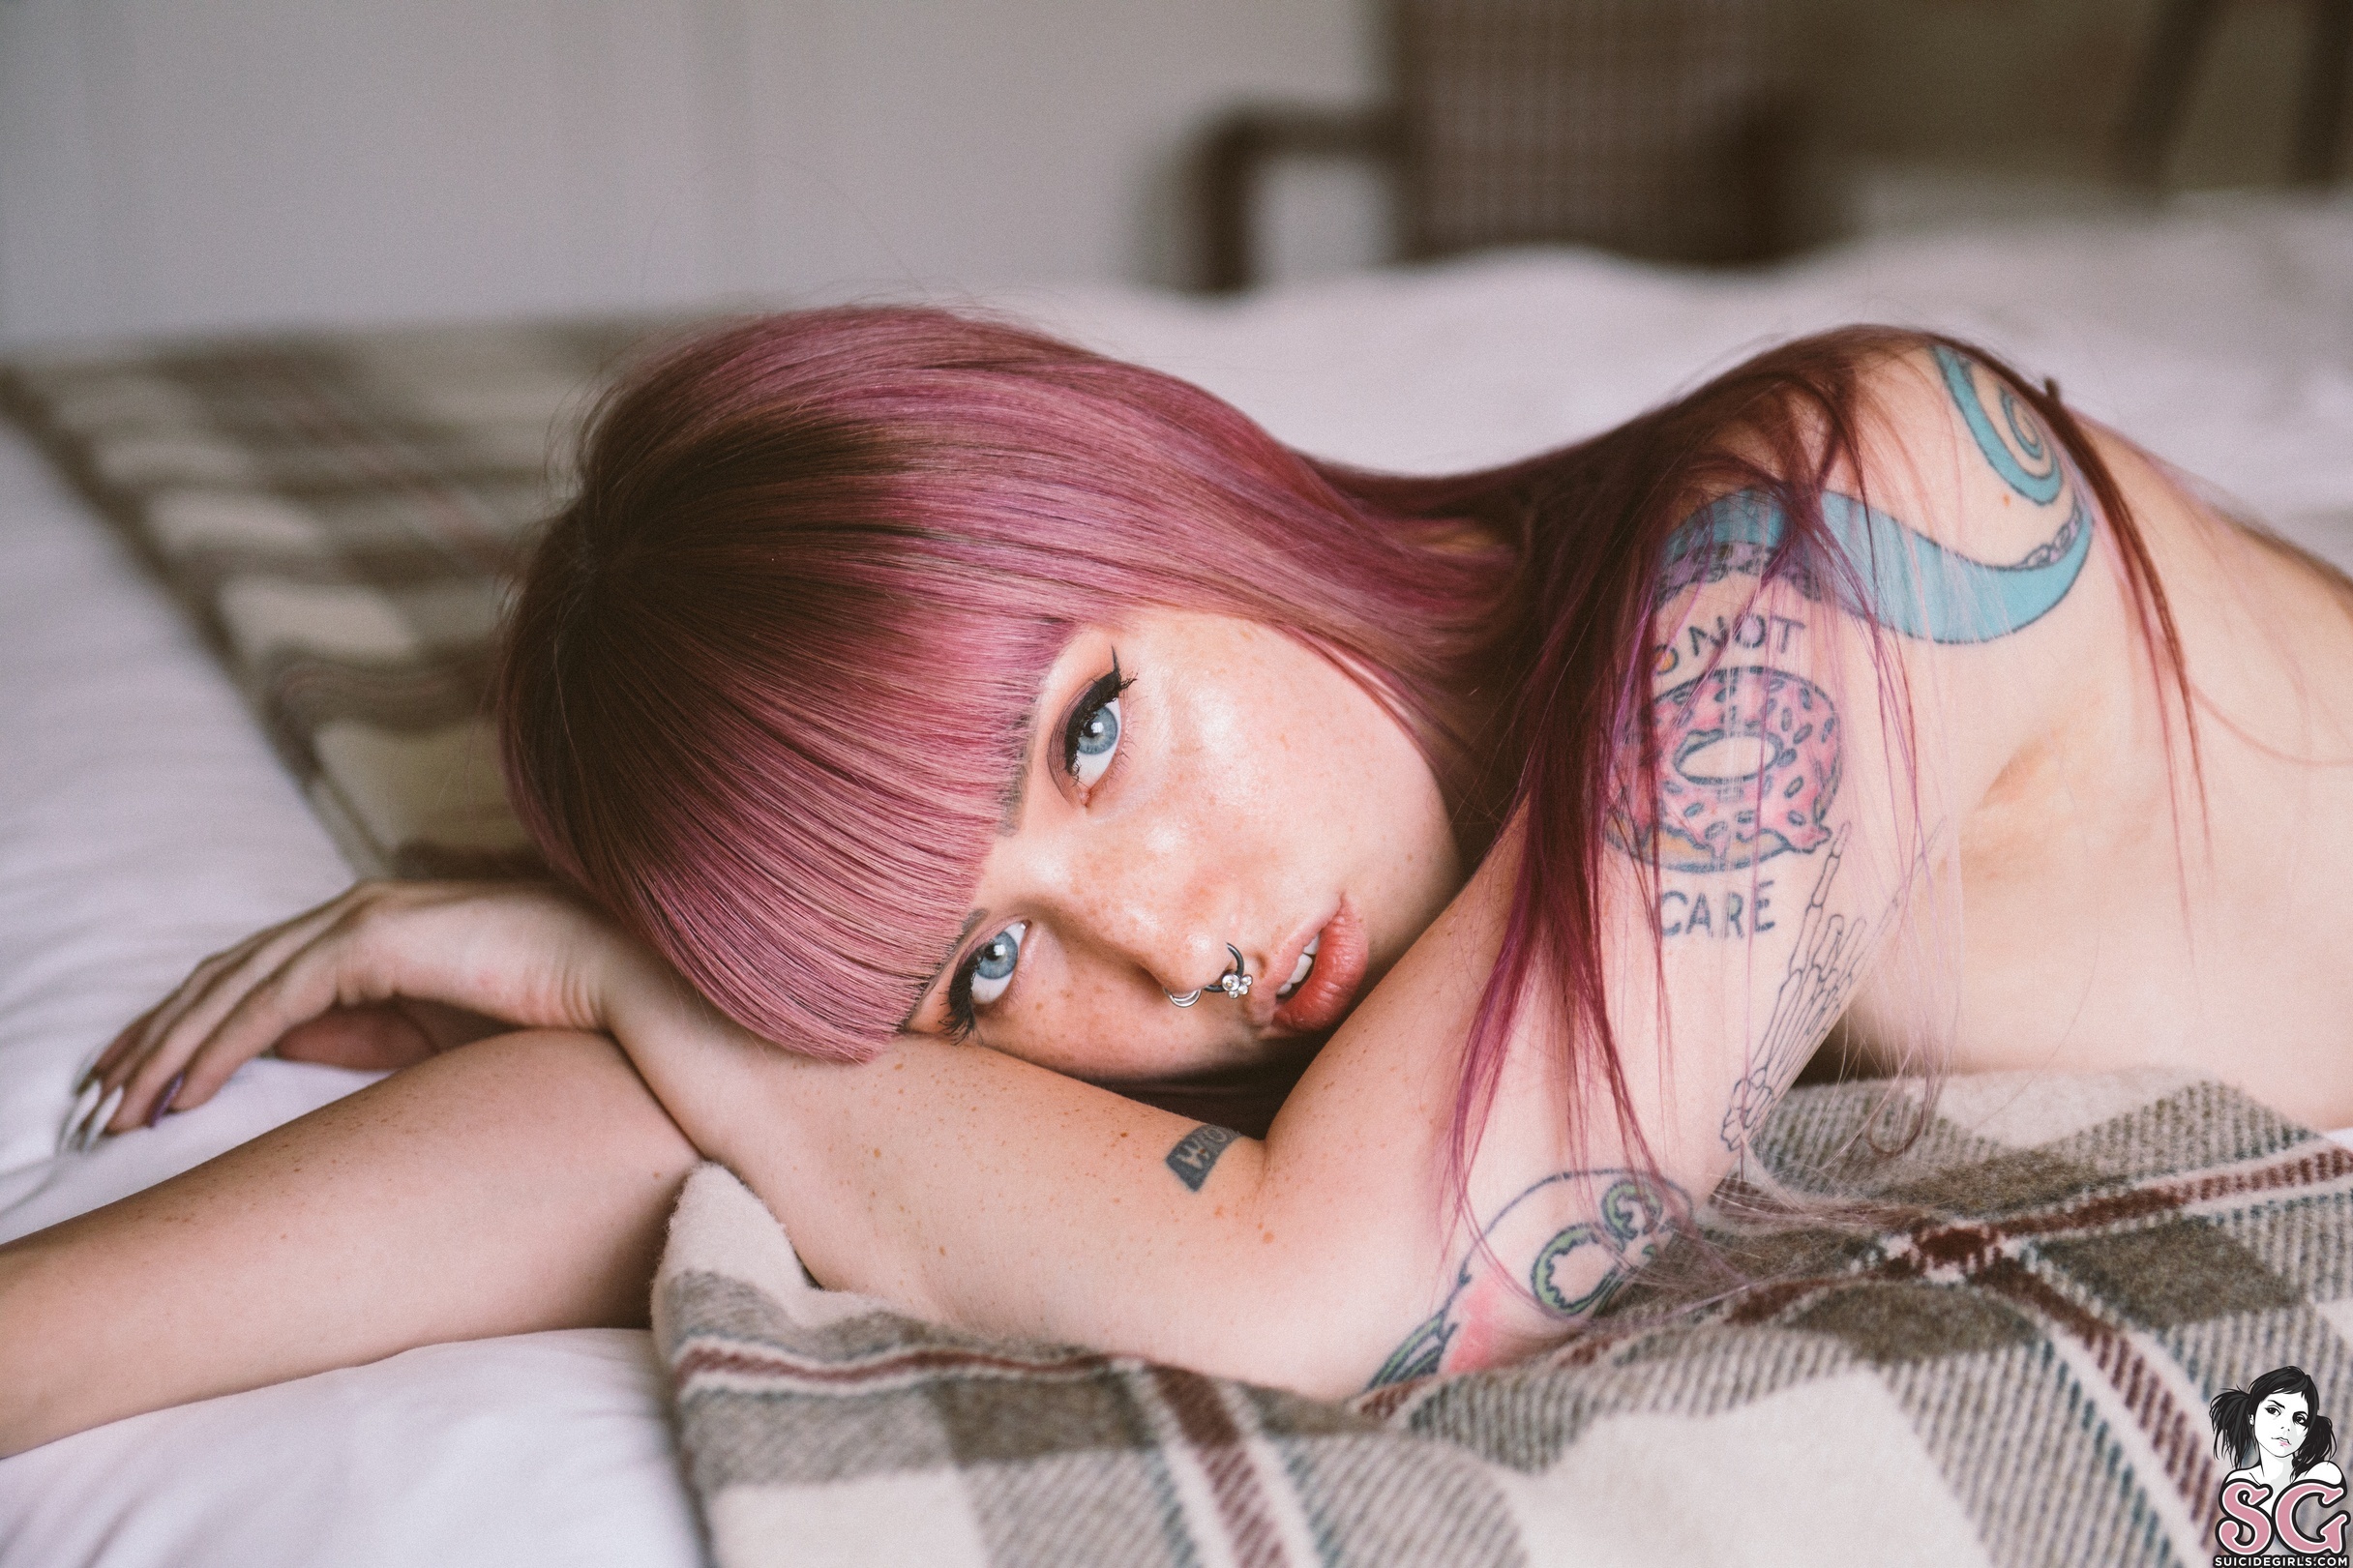 People 2432x1621 cygnet suicide Suicide Girls redhead tattoo women closeup watermarked